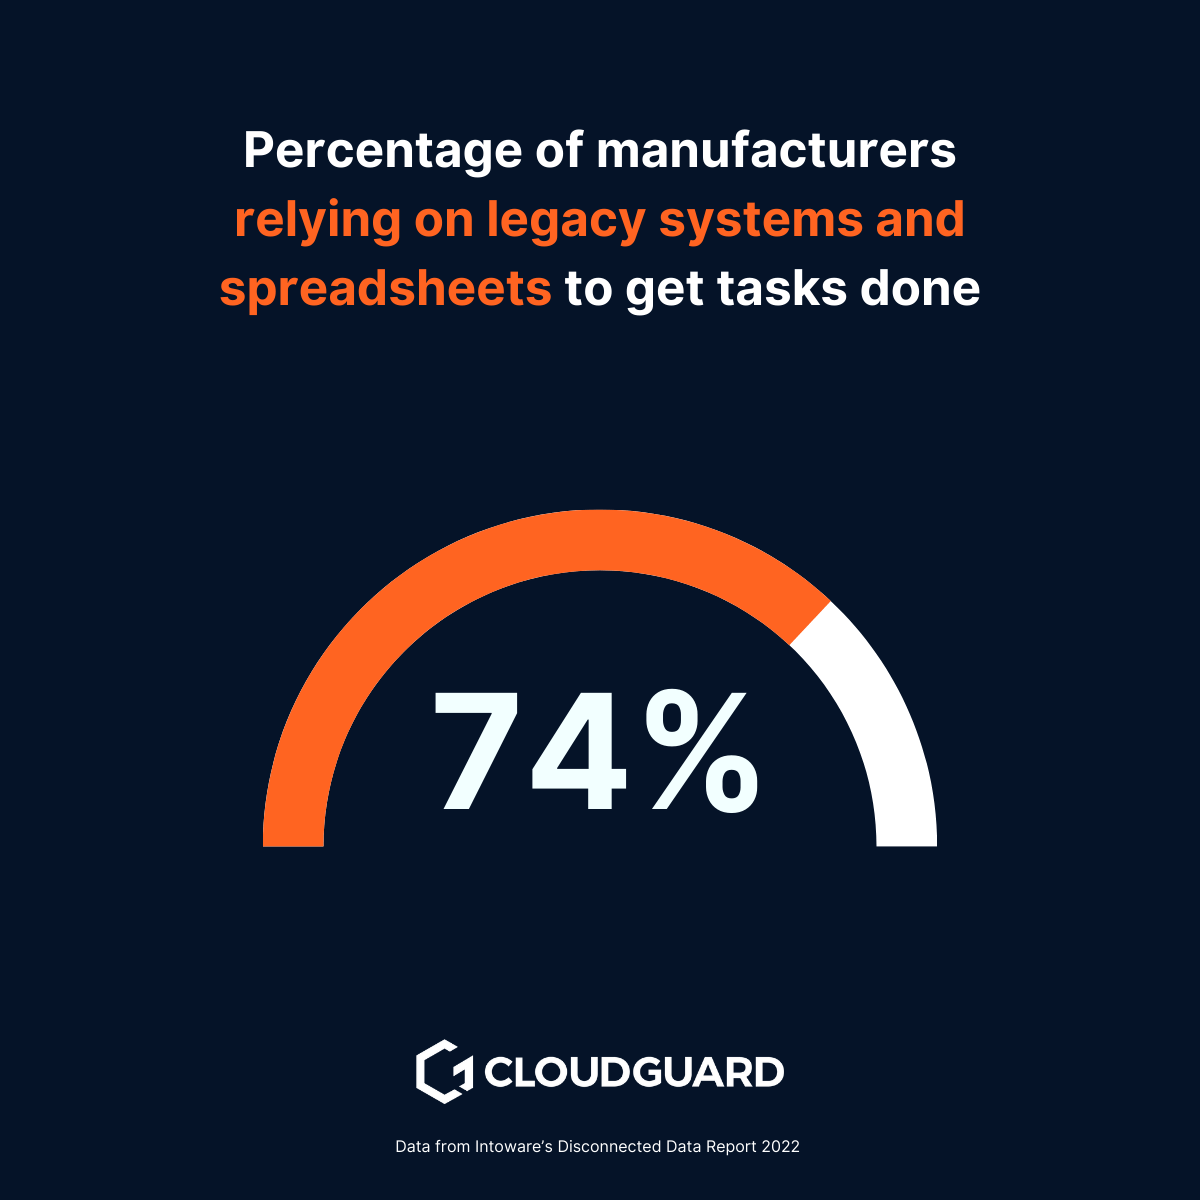 graph showing percentage of manufacturers relying on legacy systems to get tasks done